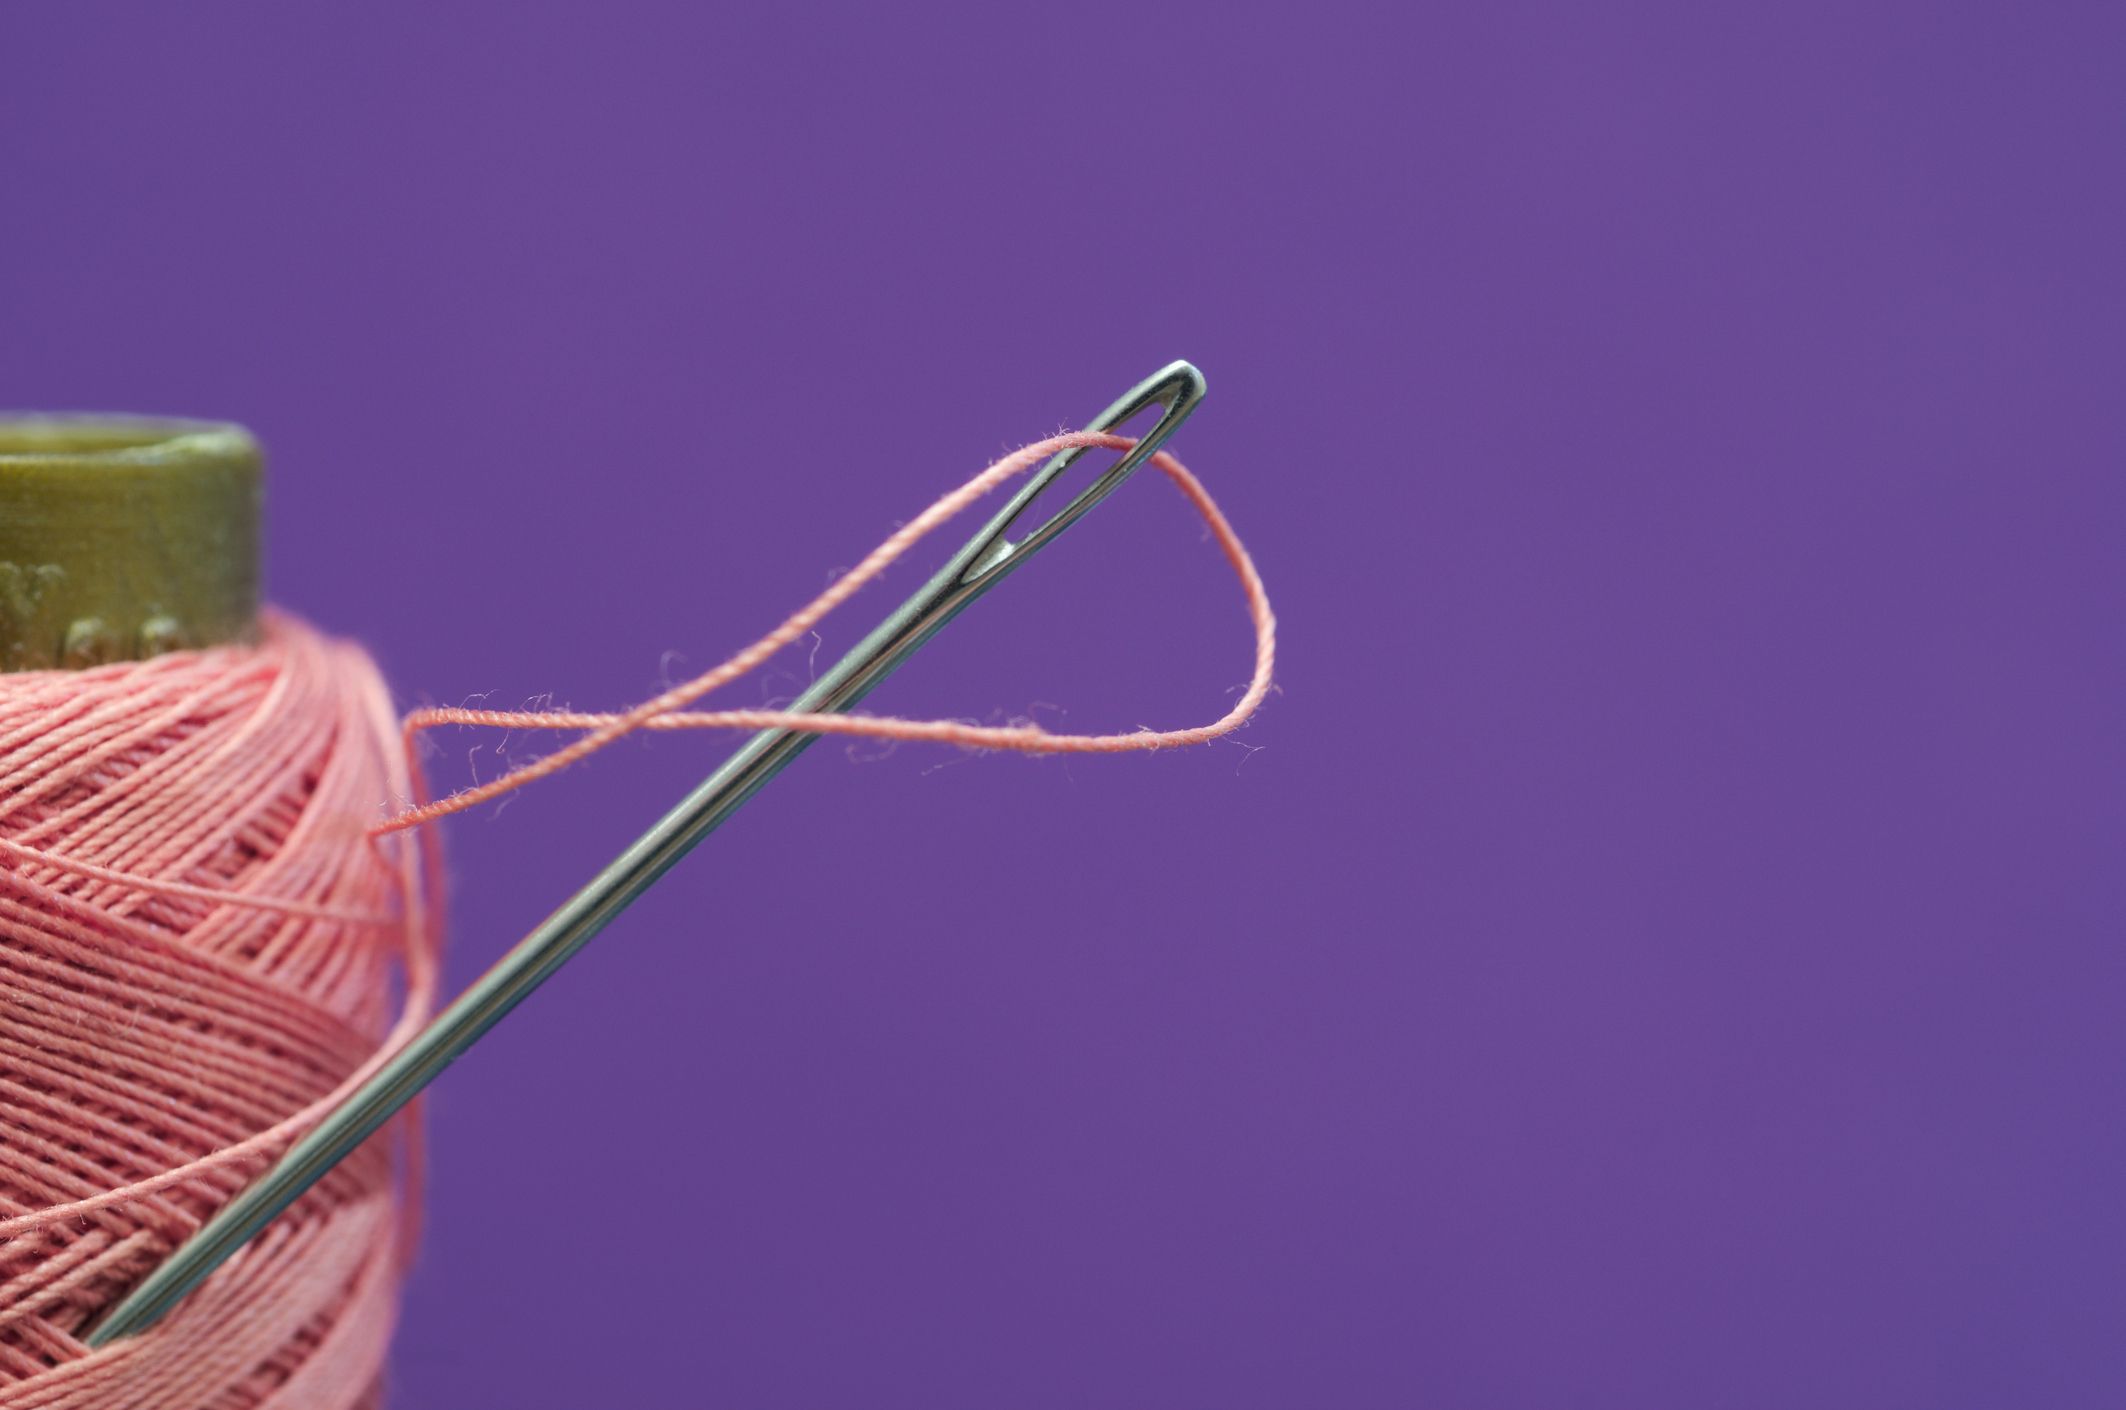 How to do a sew in: Threading needles 